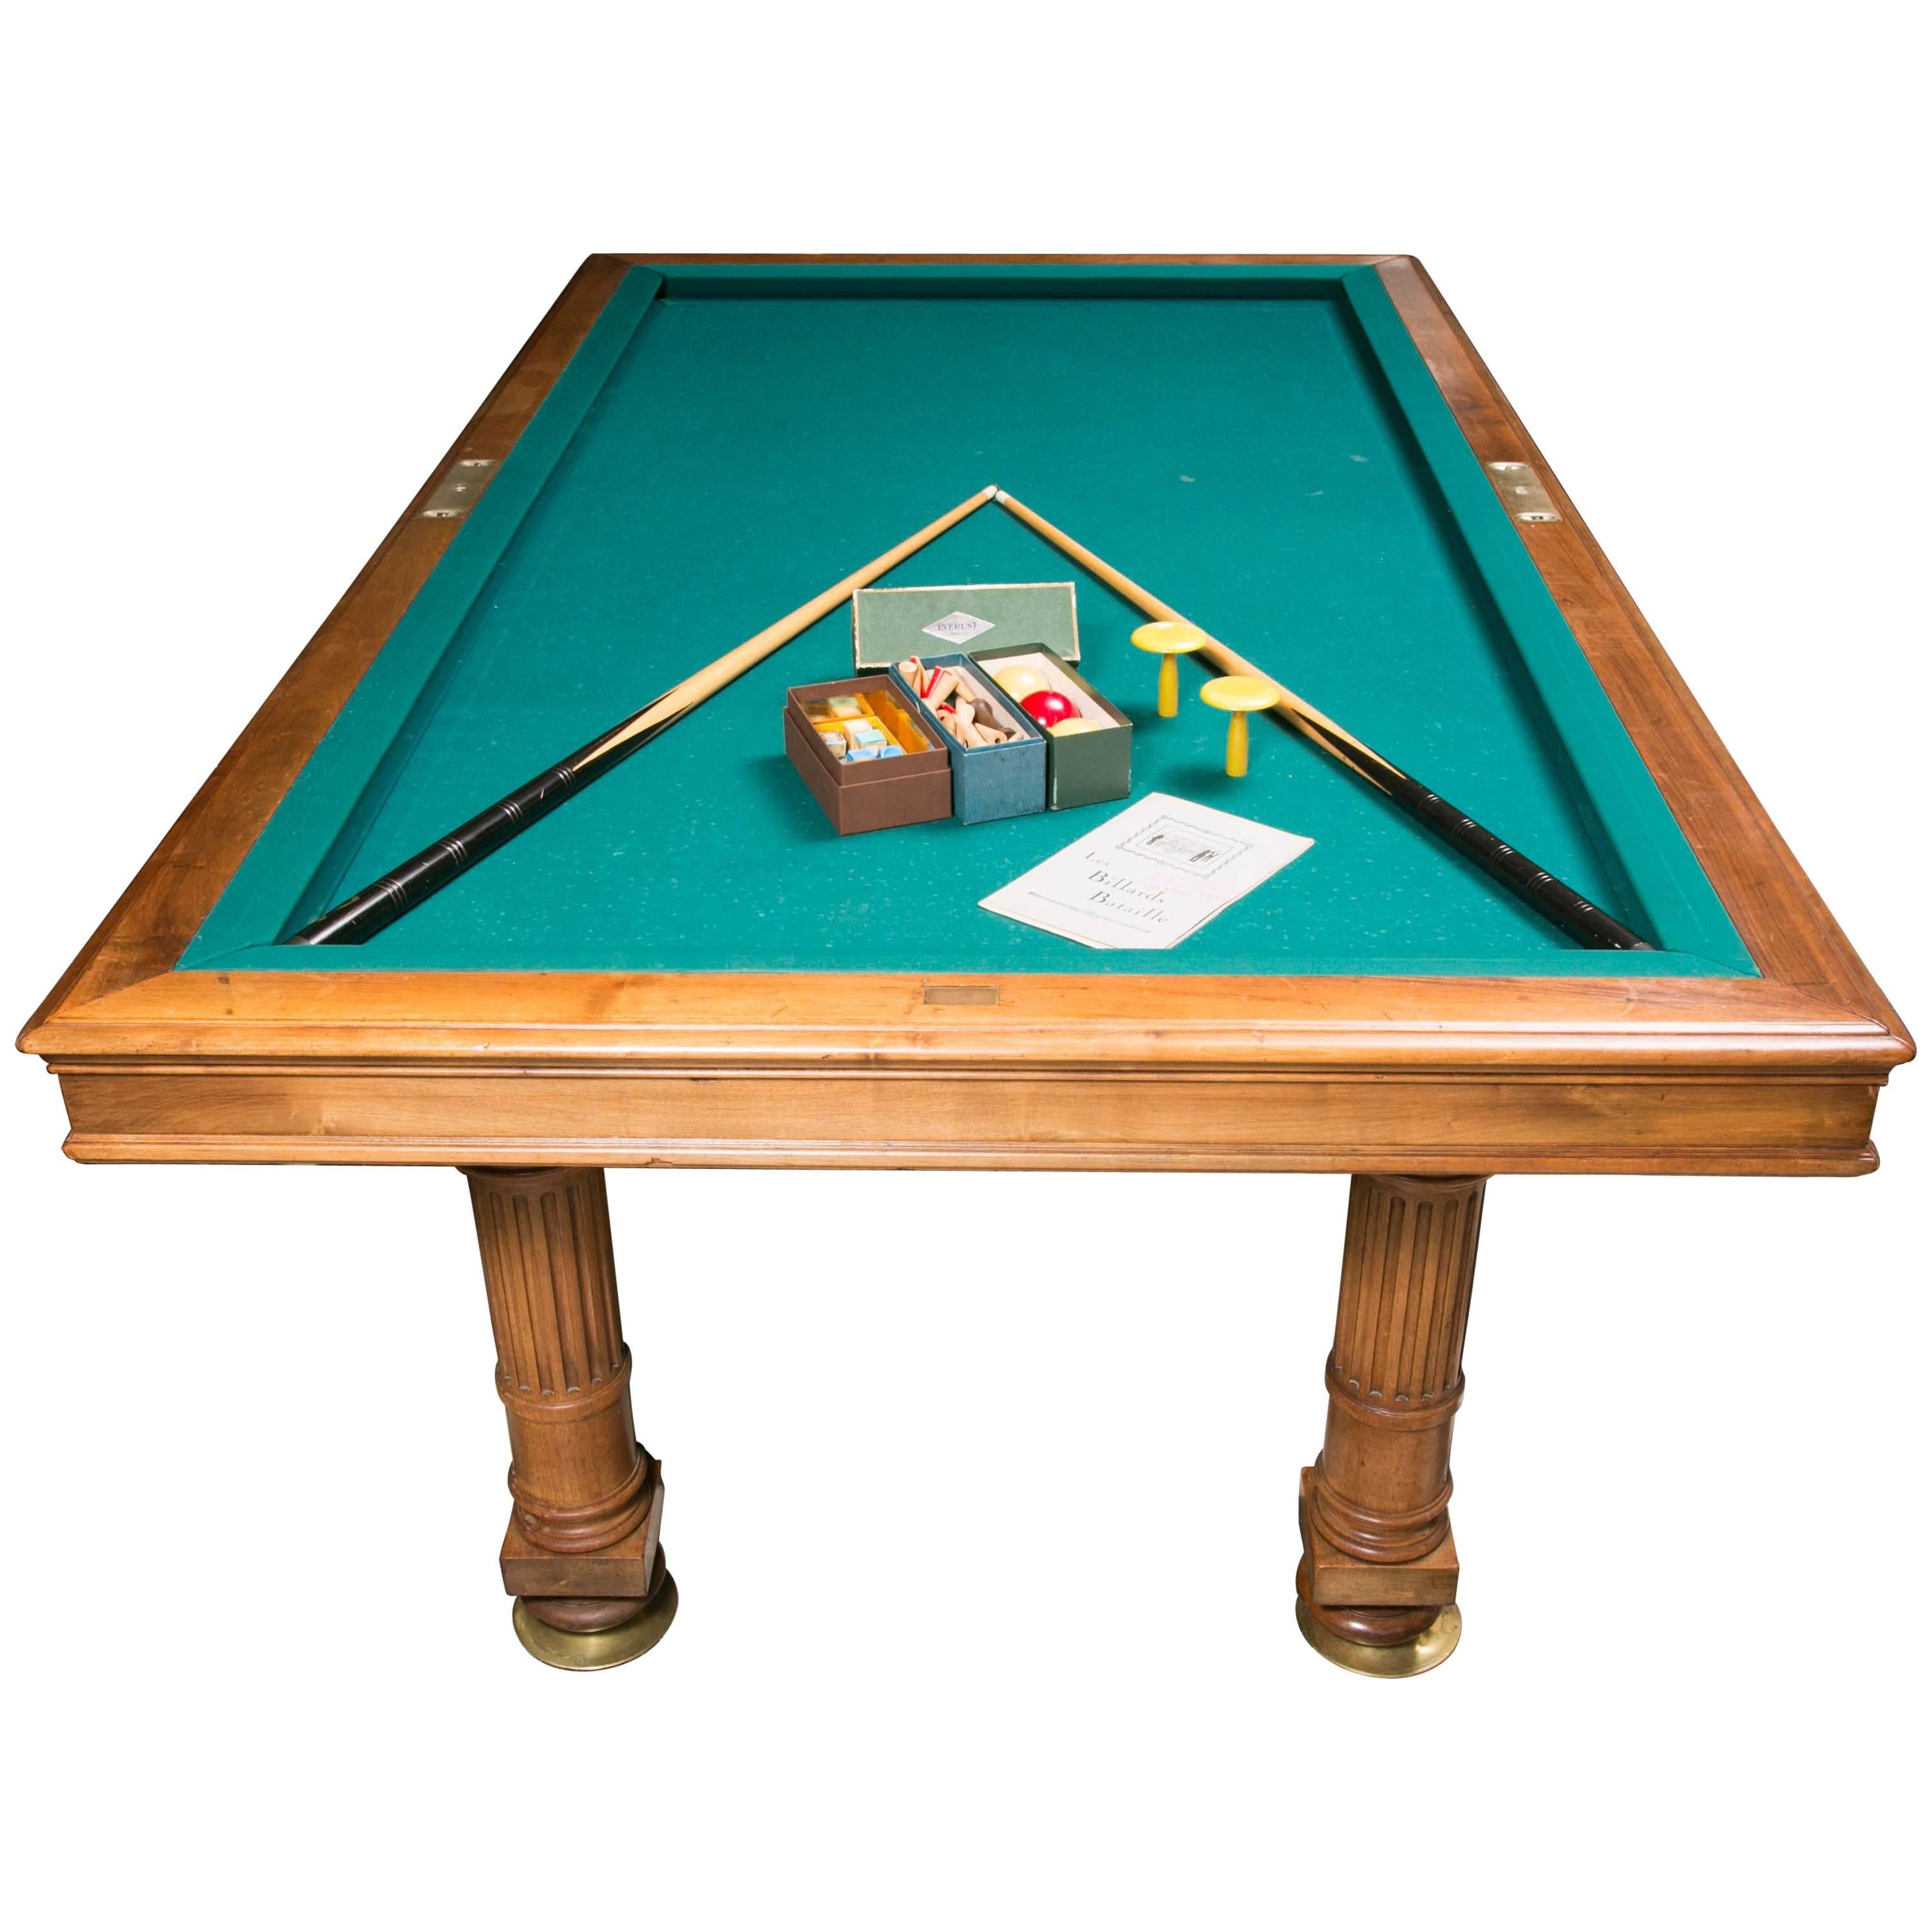 French Billiard Games Table from the Beginning of the 20th Century